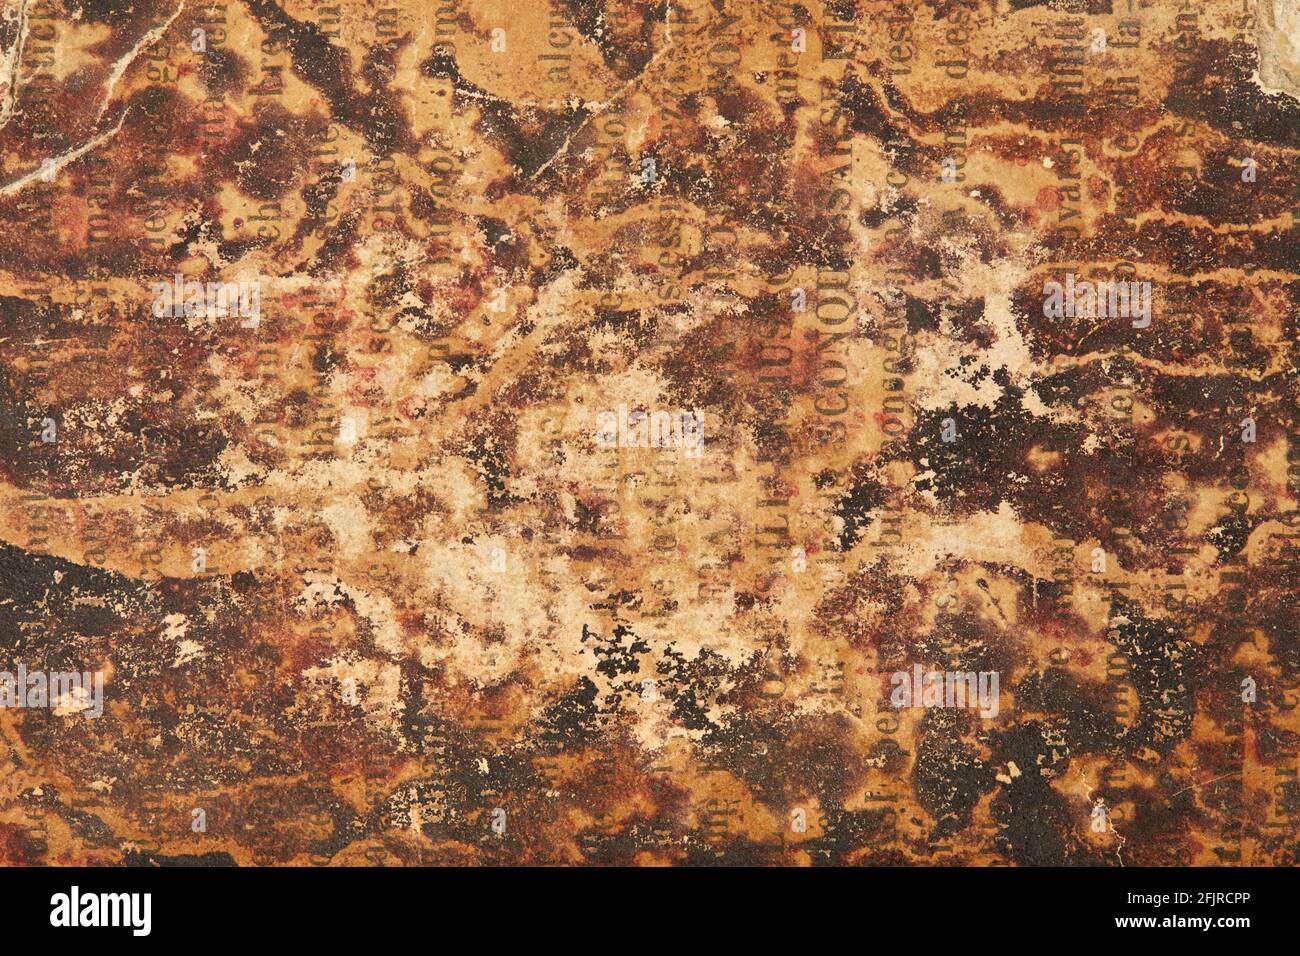 Brown, ancient, burnt printed page texture background Stock Photo